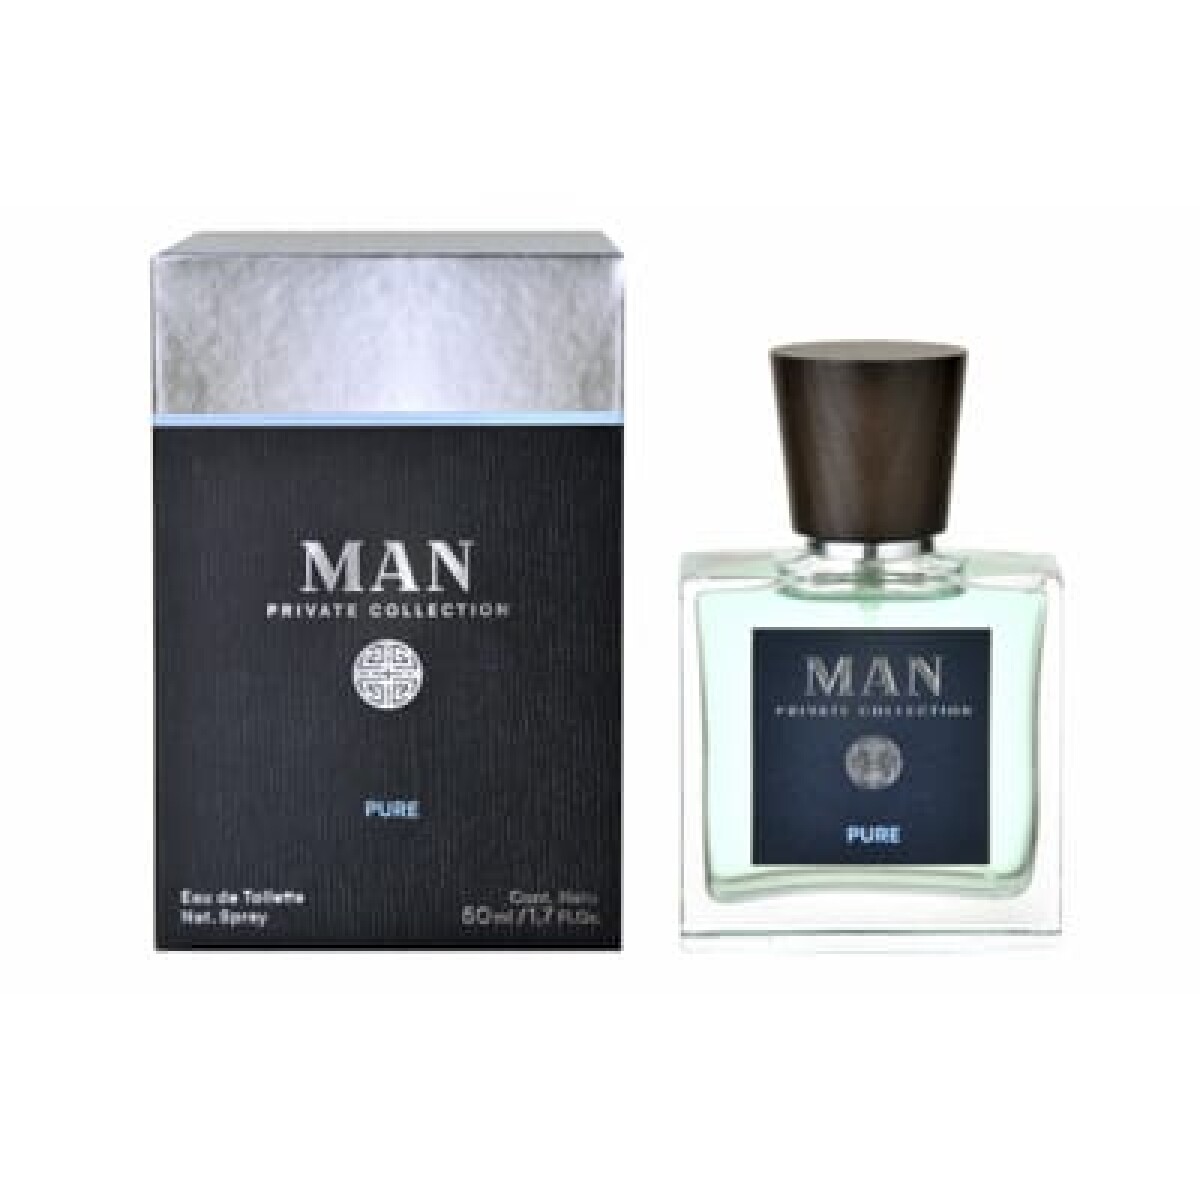 Man Private Collection Pure Edt 50 ml 